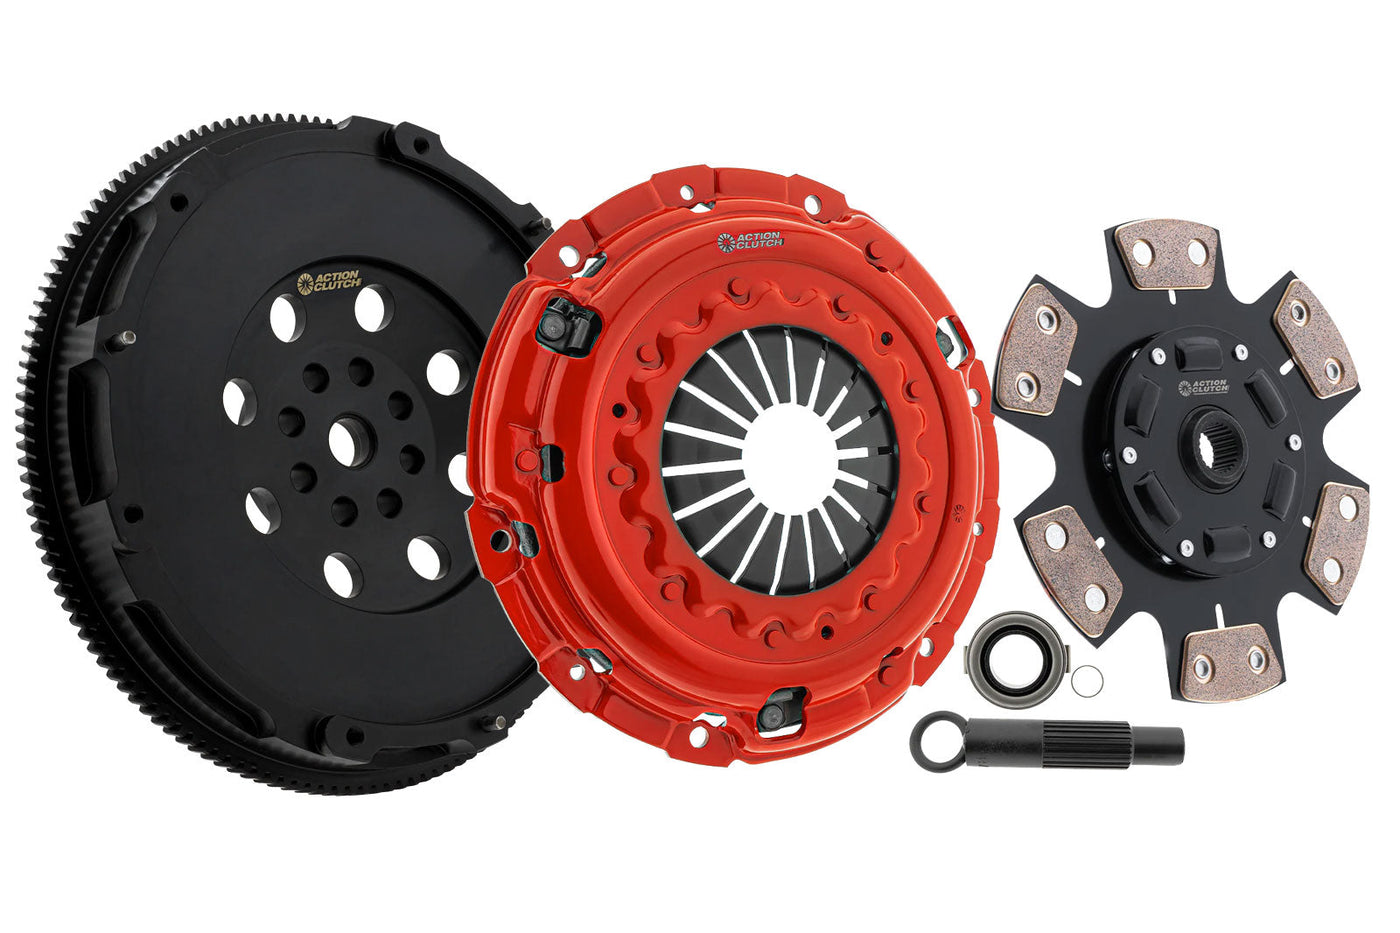 Stage 5 Clutch Kit (2MS) for Honda Civic SI 2022 1.5L (L15B7) Turbo Includes Chromoly Lightweight Flywheel